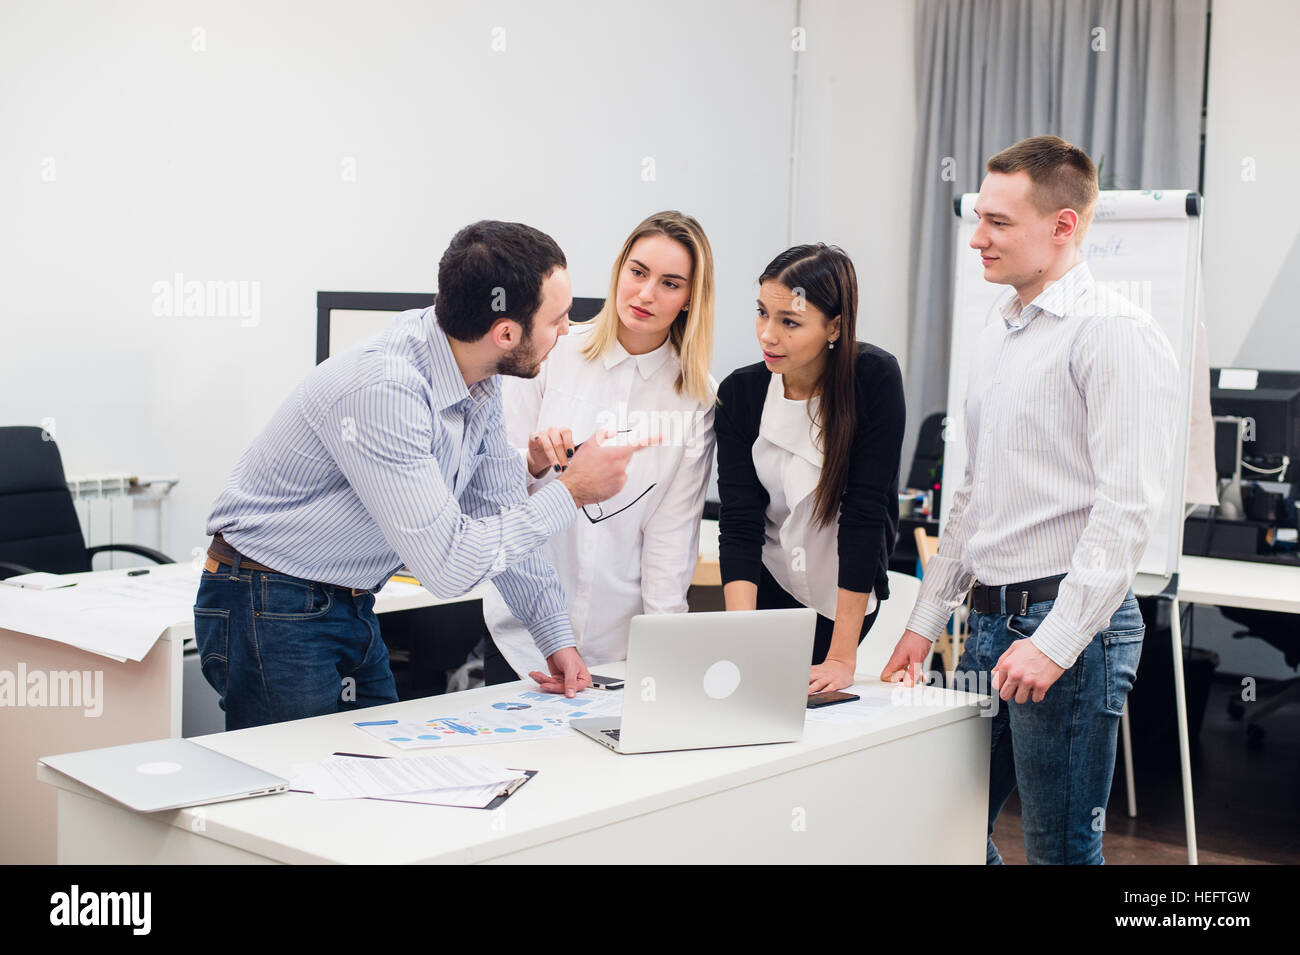 Group Young Coworkers Making Great Business Decisions.Creative Team Discussion Corporate Work Concept Modern Office.Startup Marketing Idea Presentation. Stock Photo